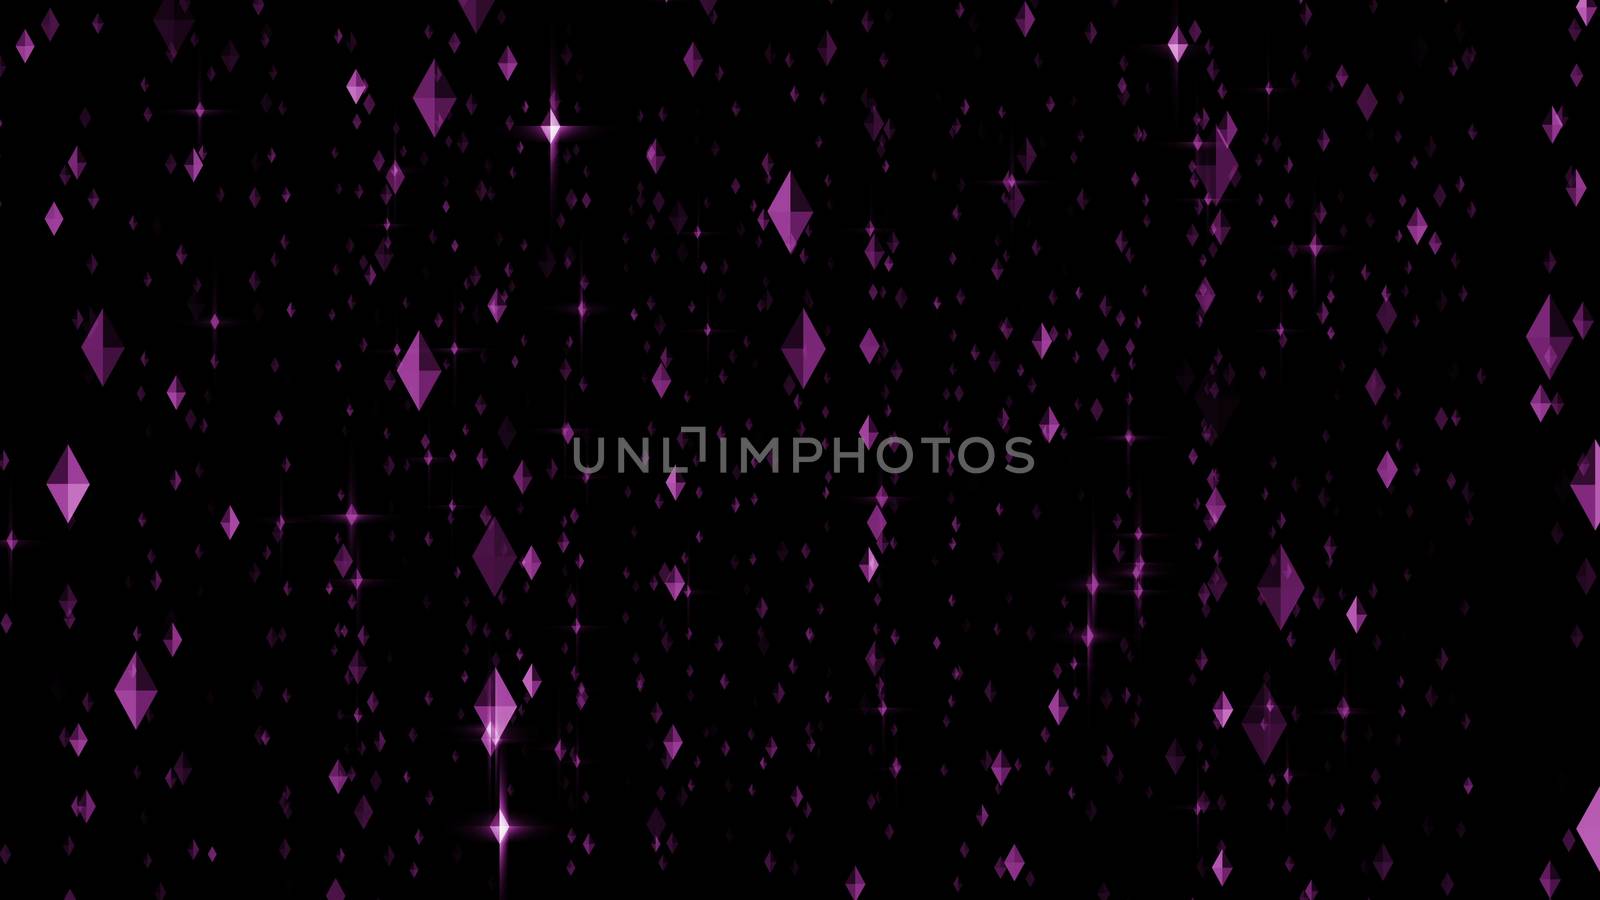 Amazing 3d rendering of sparkling violet diamond rows in the black background. The rhomb formed gems spin in a volumetric space in an arty way.